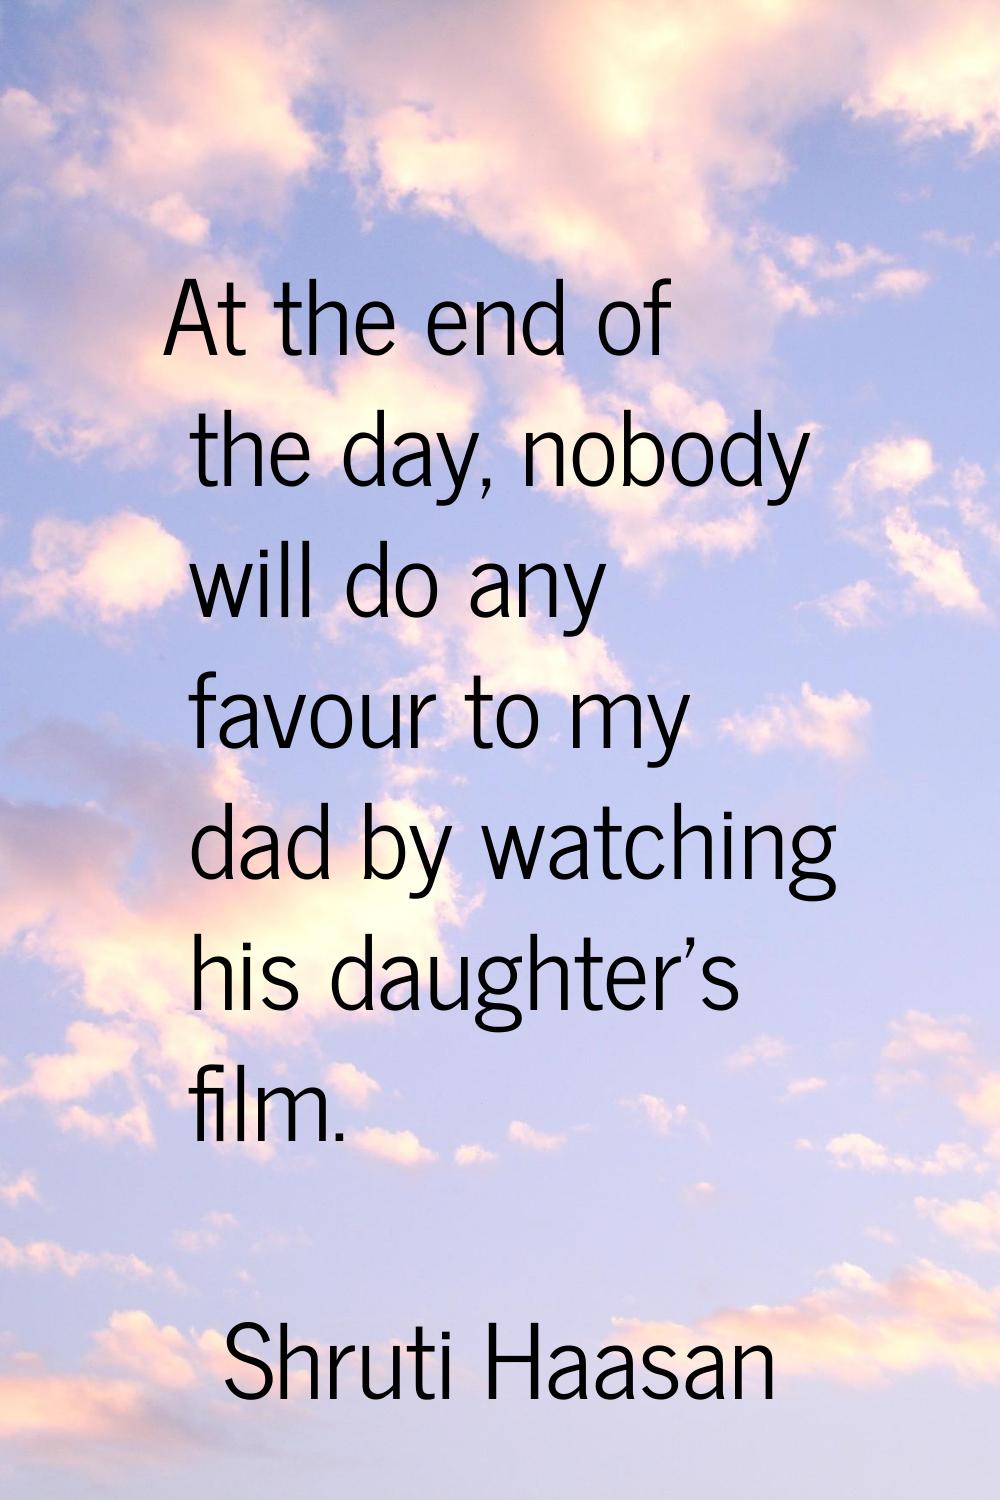 At the end of the day, nobody will do any favour to my dad by watching his daughter's film.